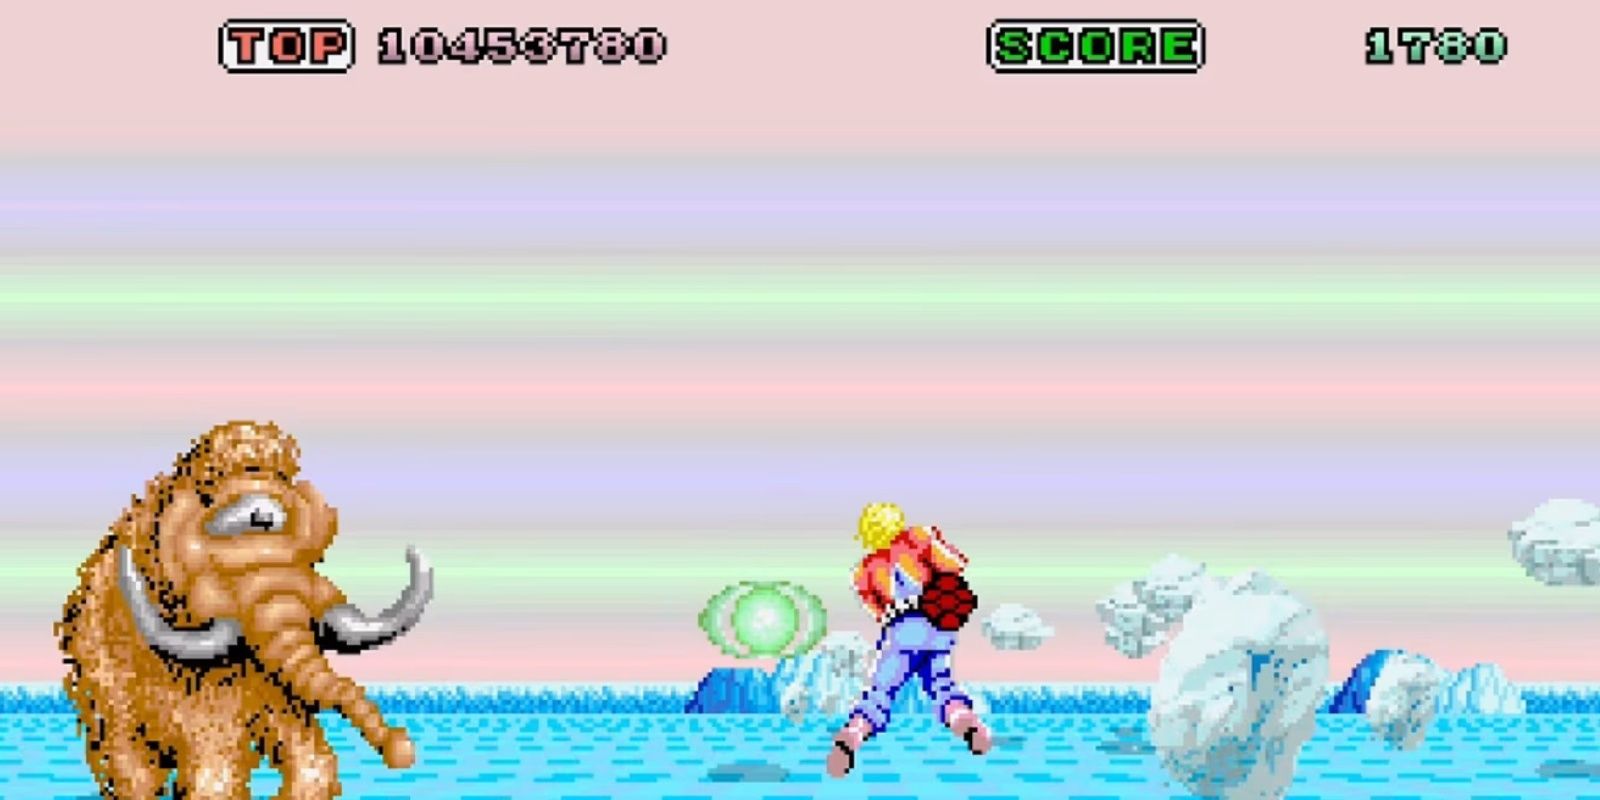 main character from space harrier flying through a level